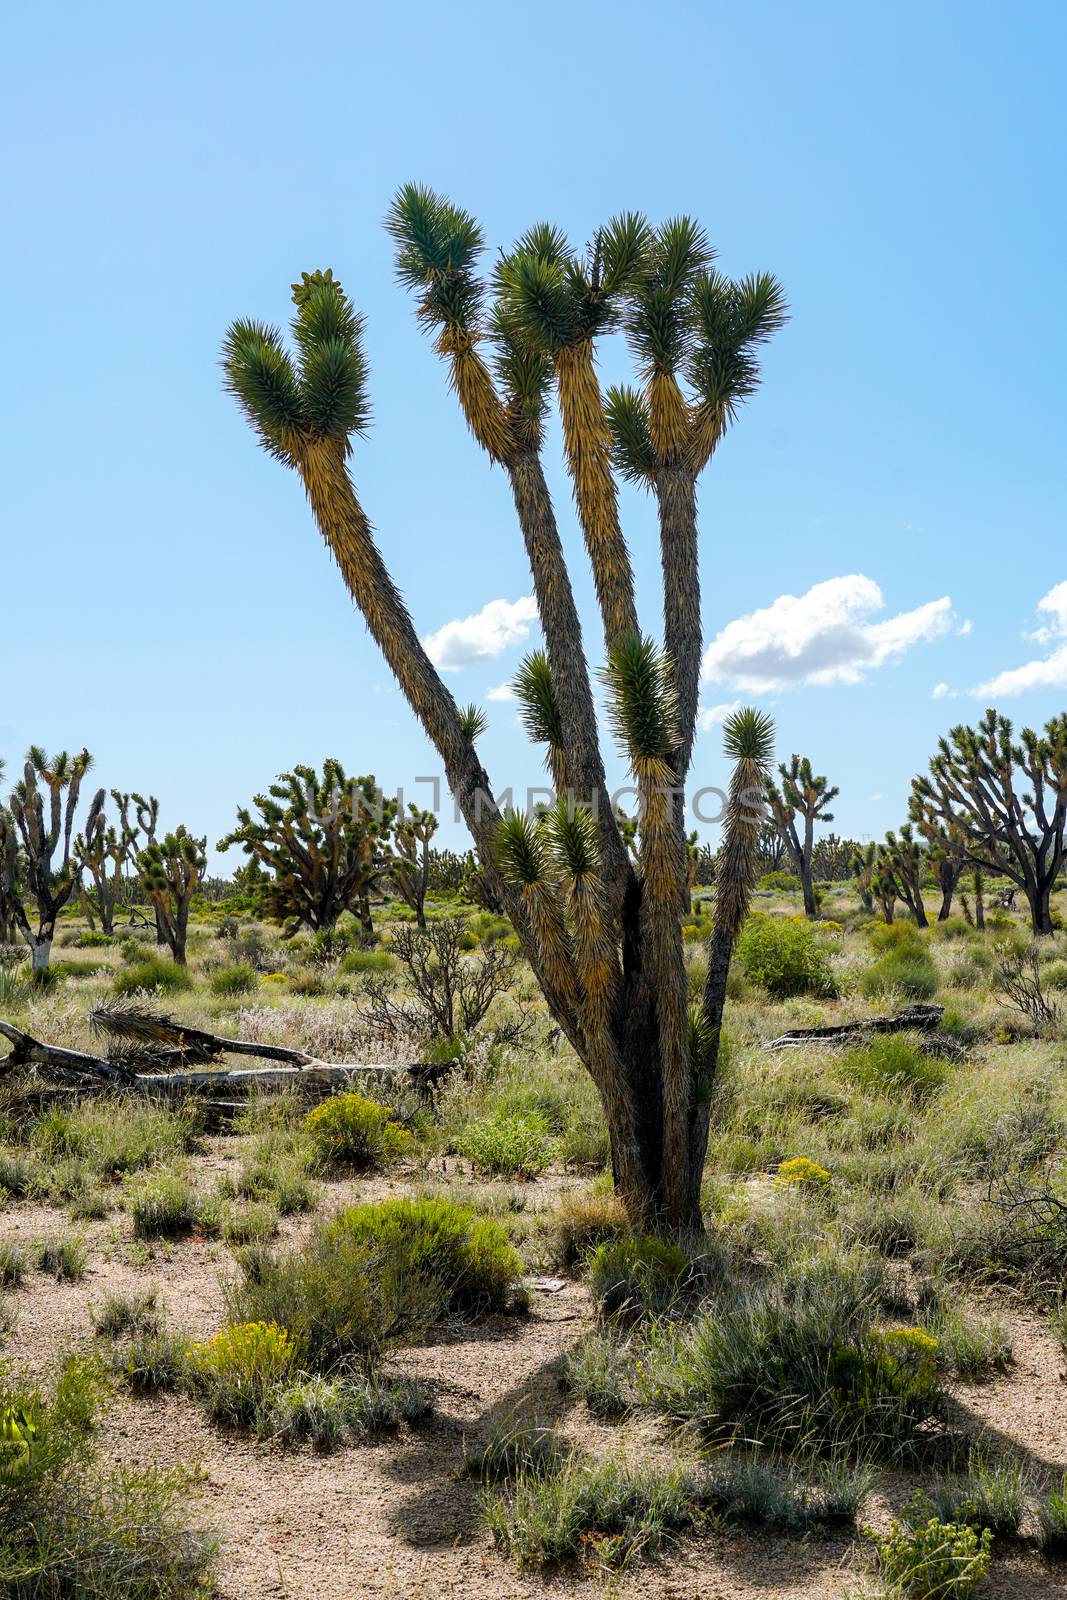 Joshua Tree National Park. American desert national park in southeastern California. Yucca brevifolia, Joshua Tree is a plant species belonging to the genus Yucca.